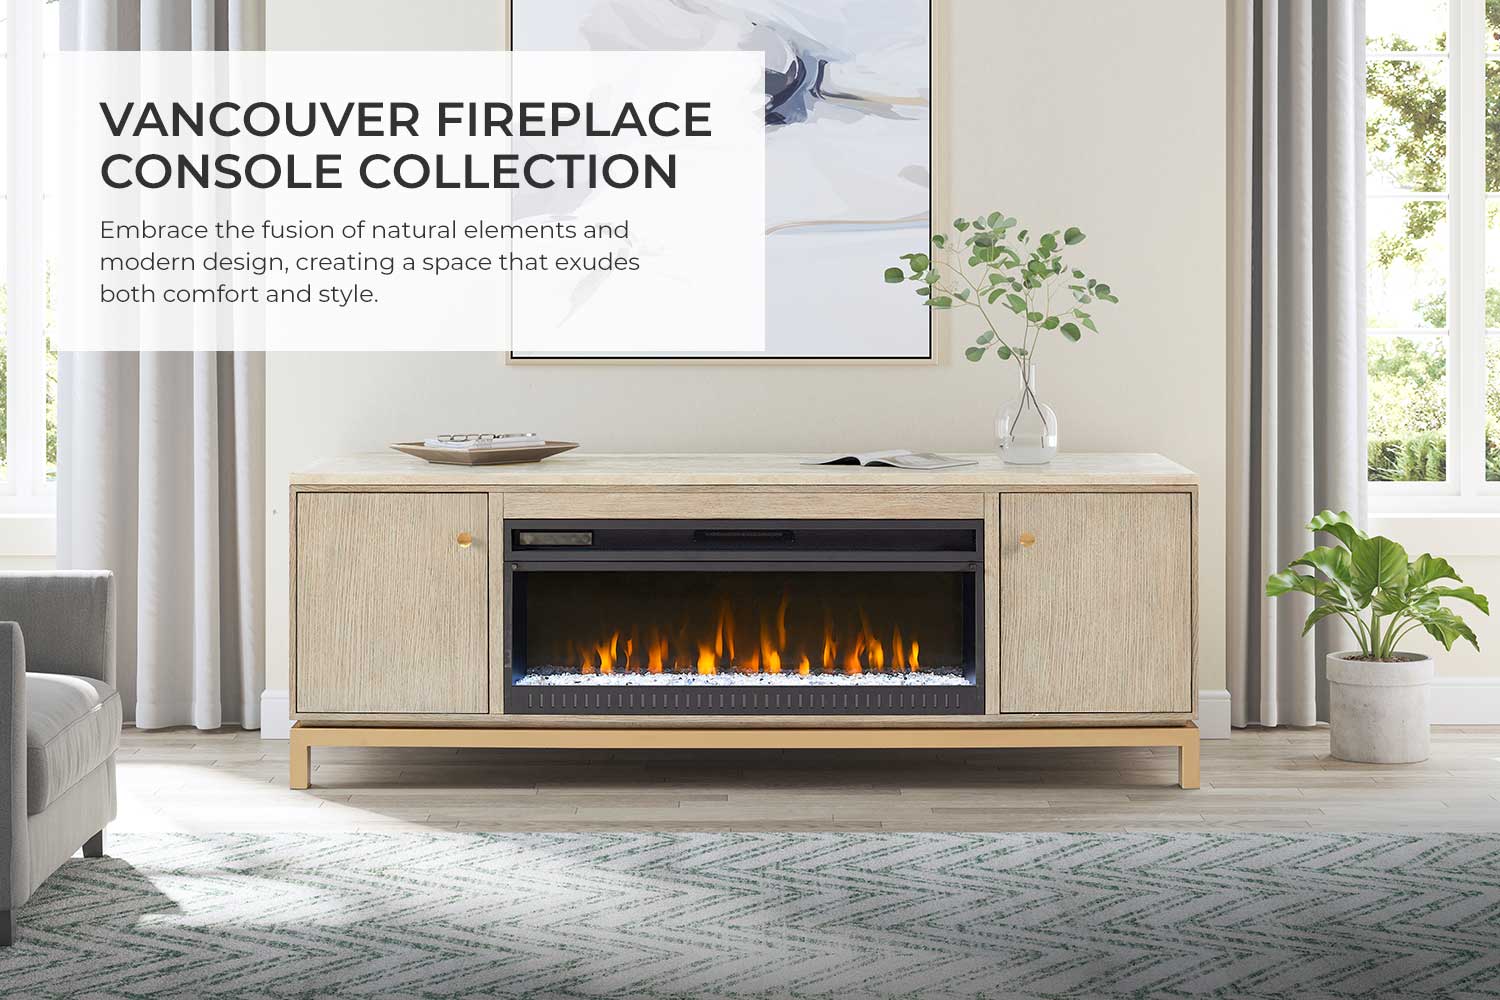 Vancouver Fireplace Console Collection